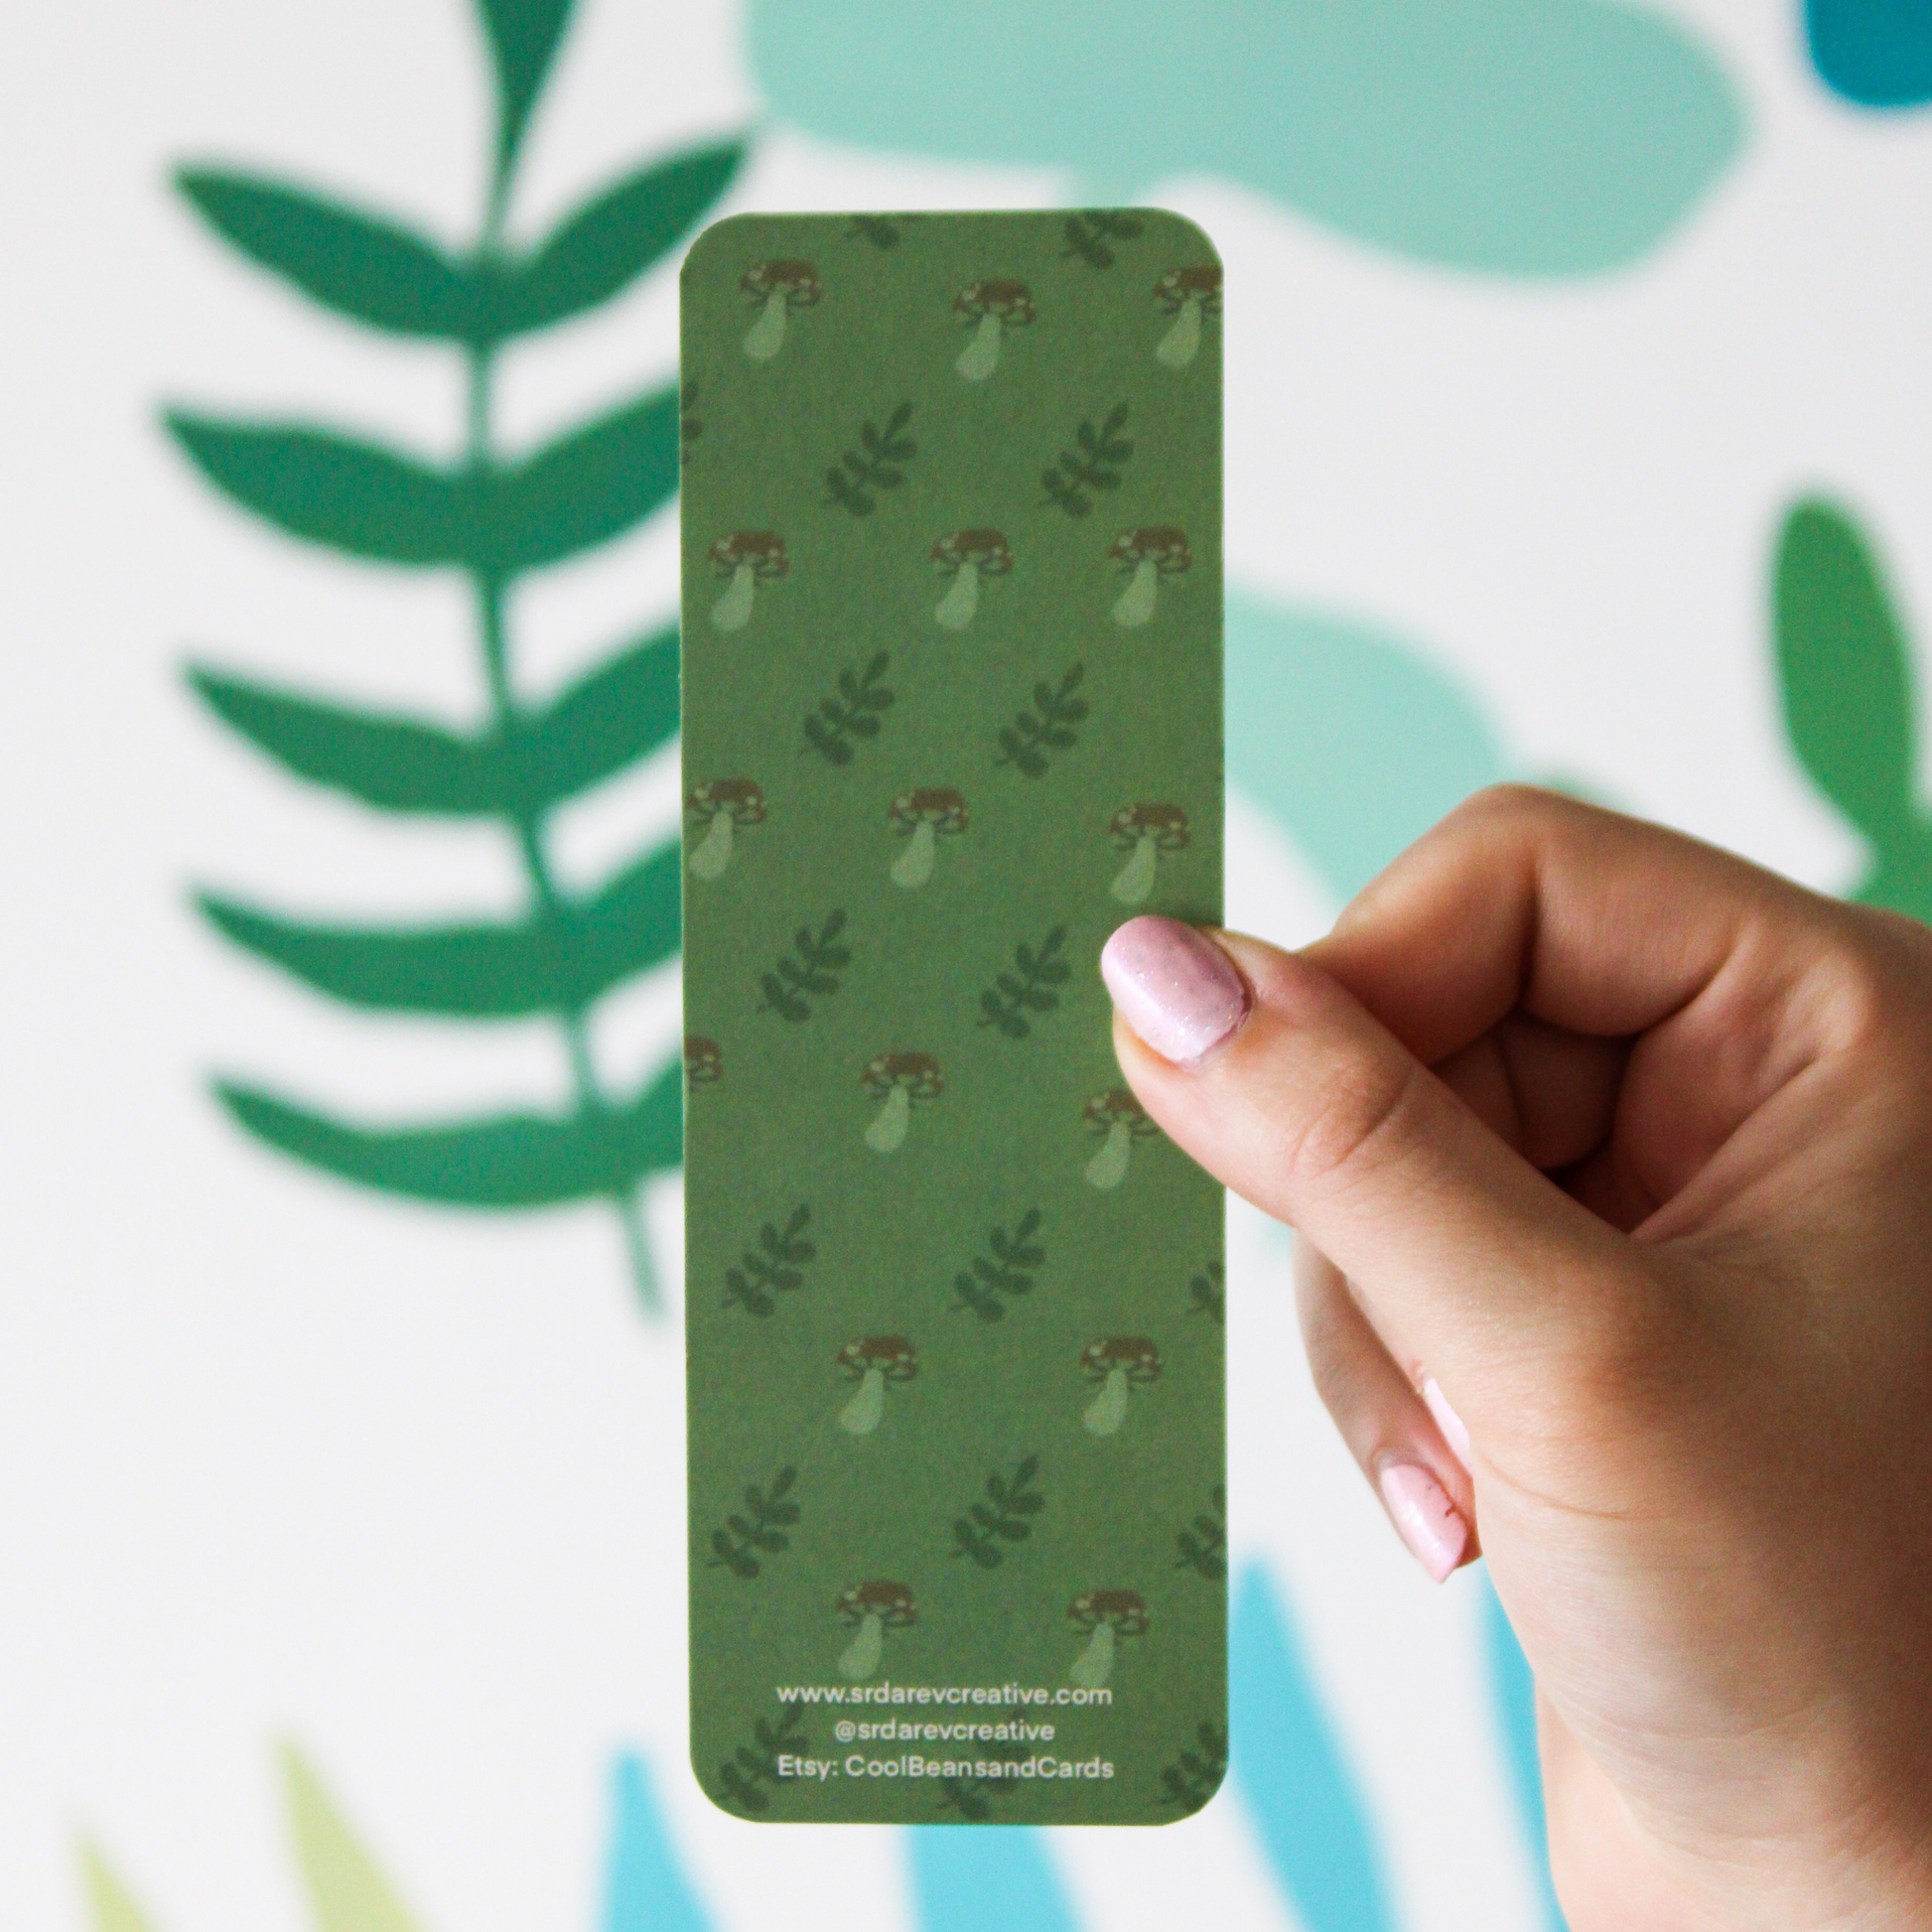 A hand holding the back of the green mushroom bookmark. There is "www.srdarevcreative.com @srdarevcreative Etsy: CoolBeansandCards" written on the bottom. The background is a blurred leaf pattern. 